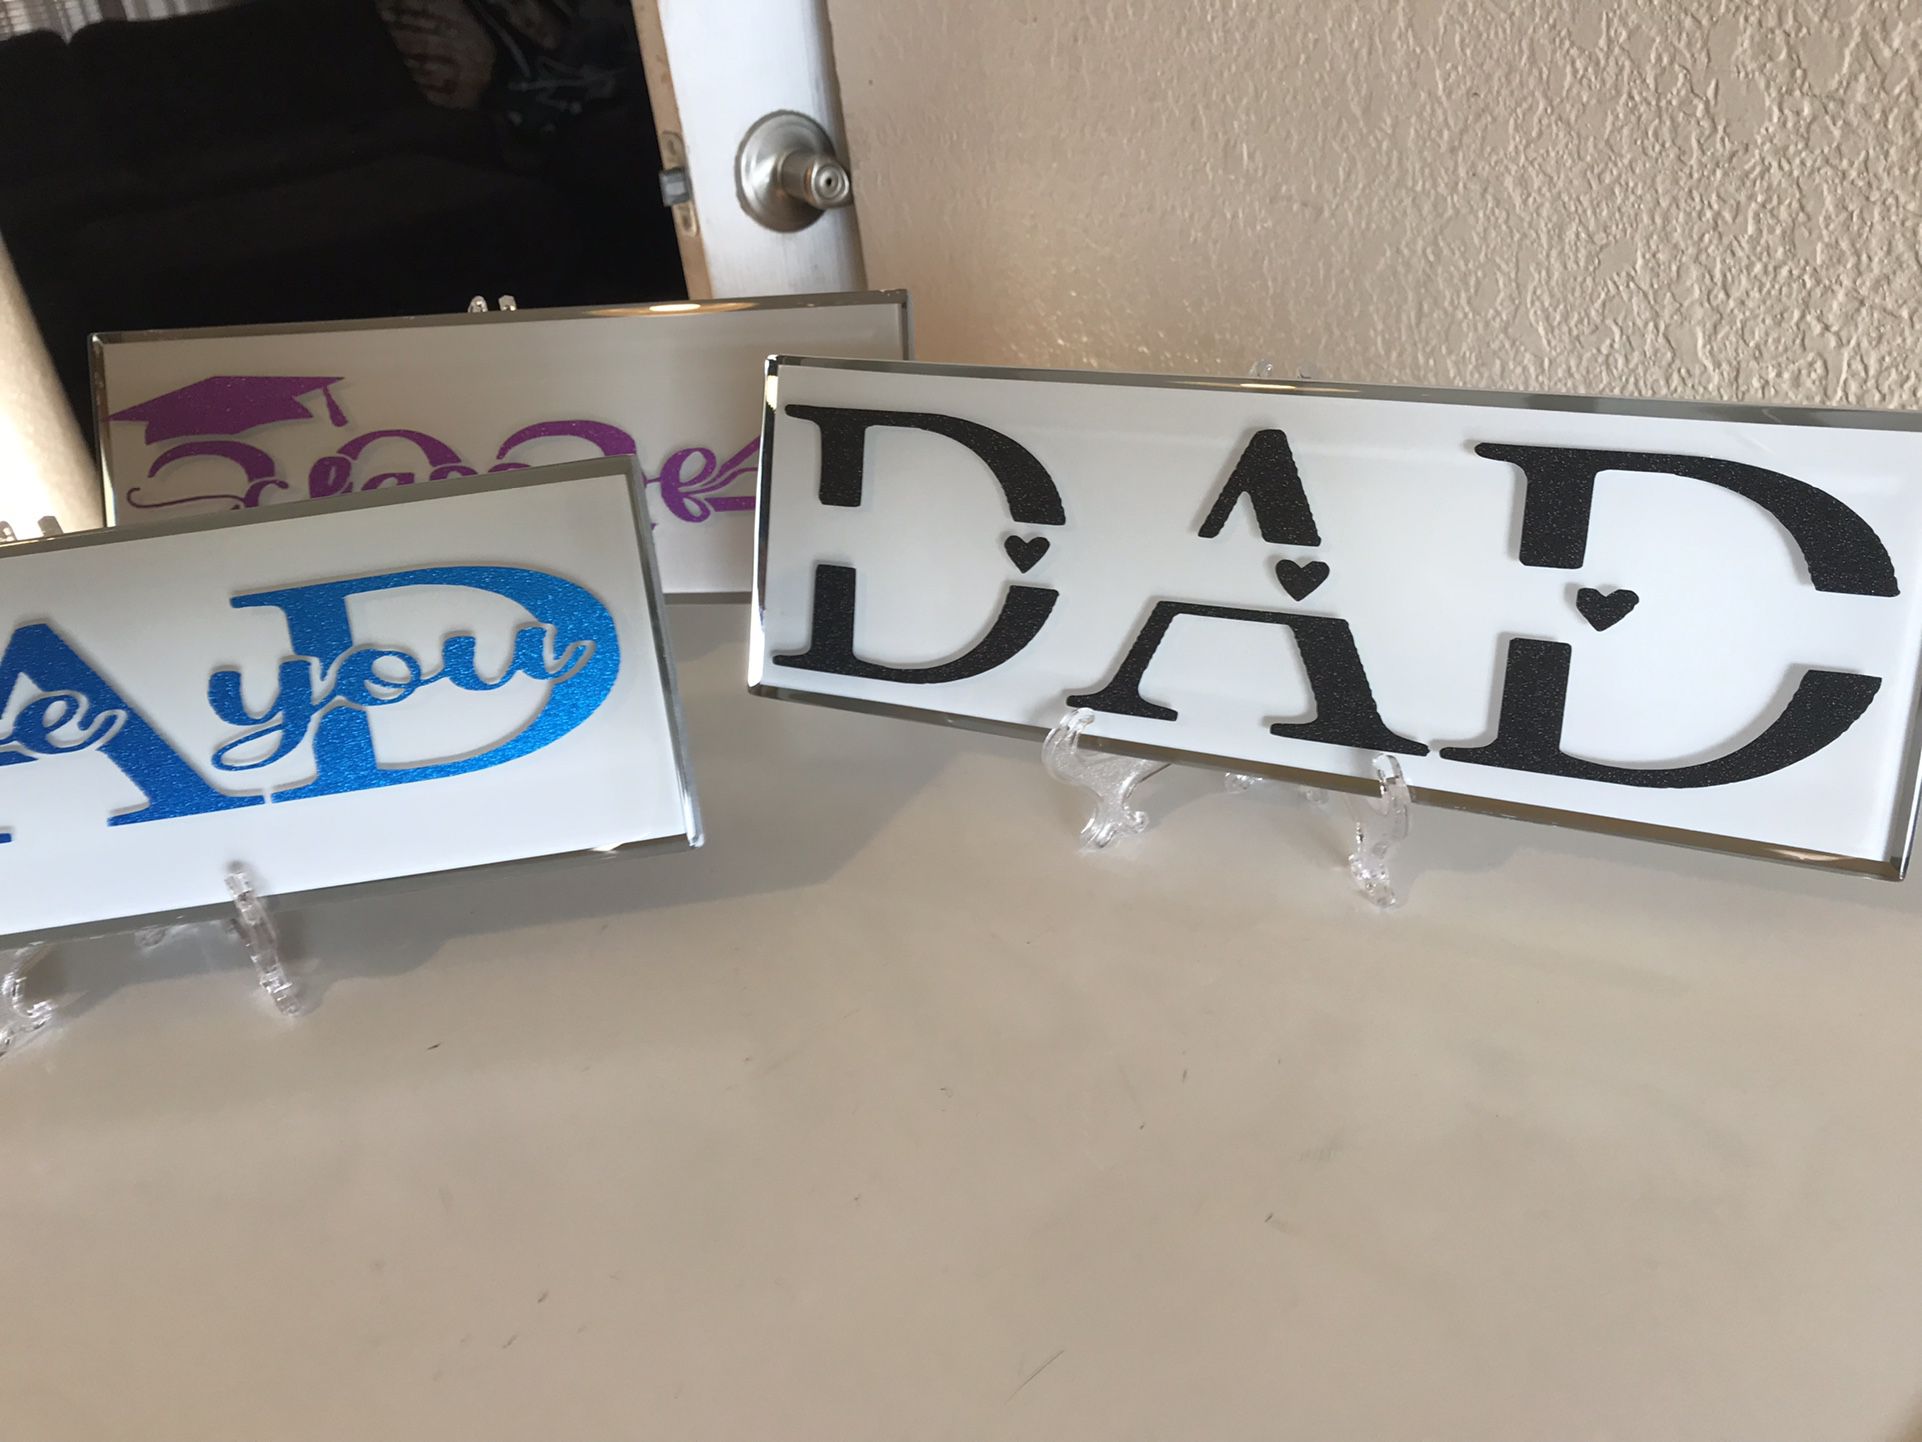 Fathers Day And B Day And Graduation Plaques Personalized And Choice Of Colors $25 Each